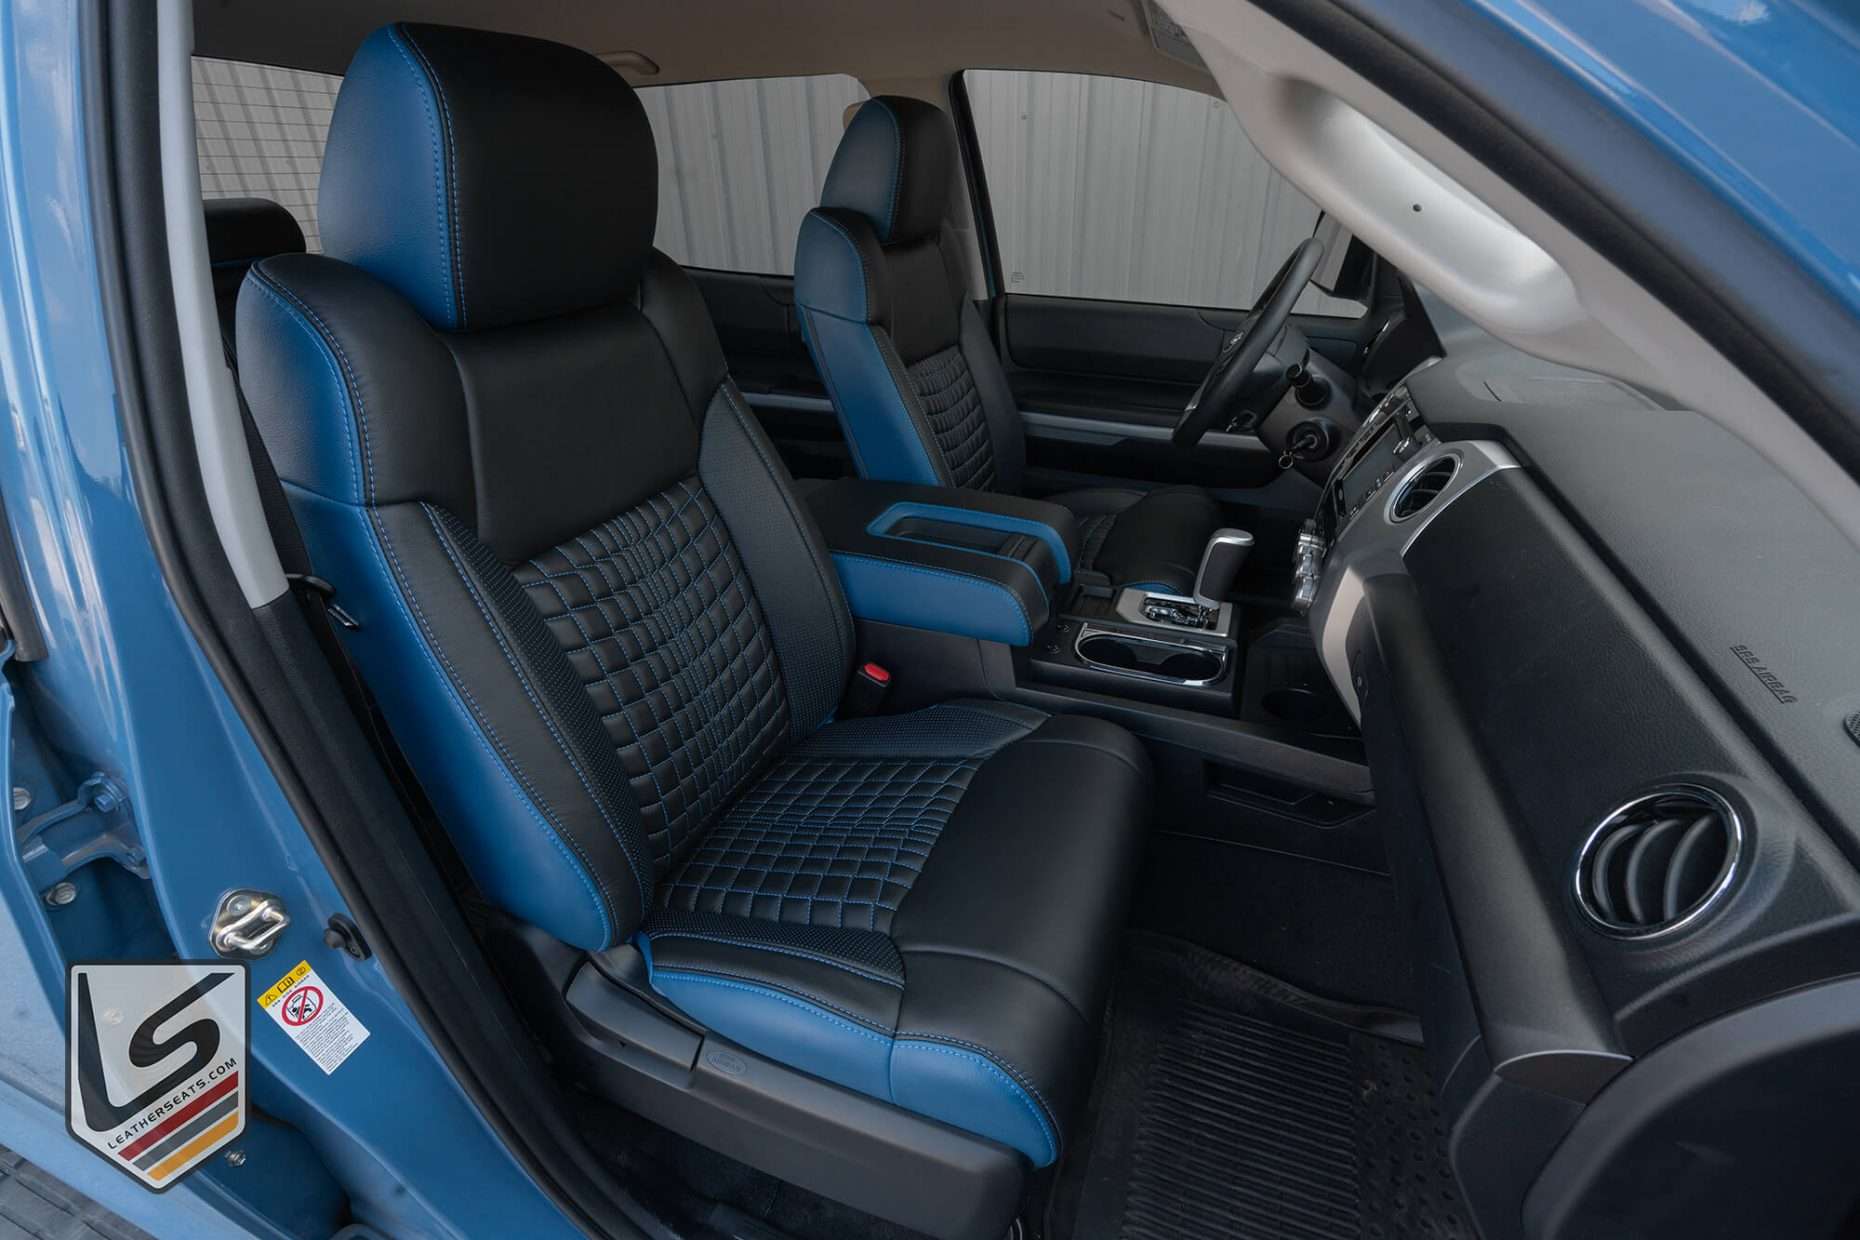 2019 Toyota Tundra with quilted leather seats - Front passenger seat